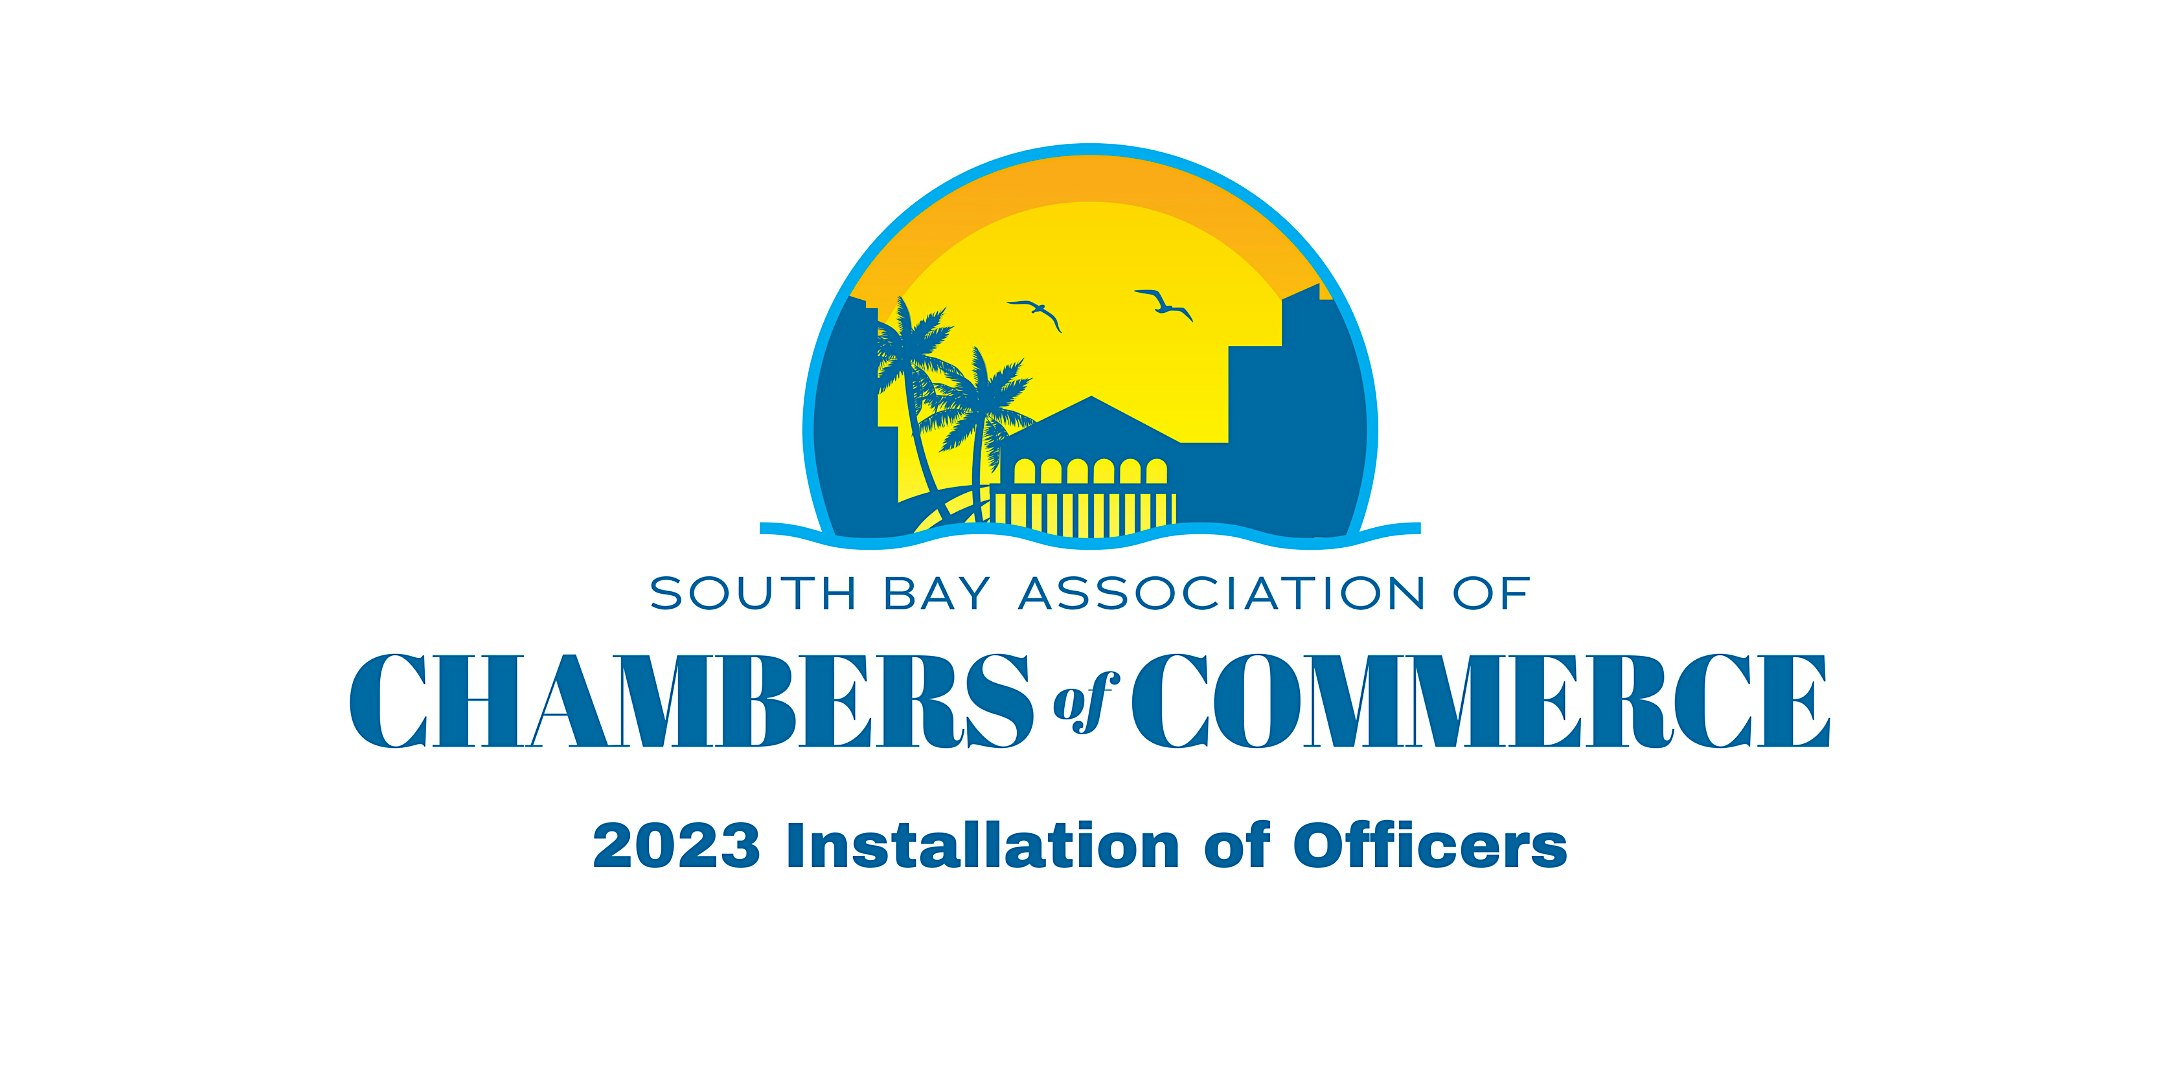 South Bay Association of Chambers of Commerce- 2023 Installation